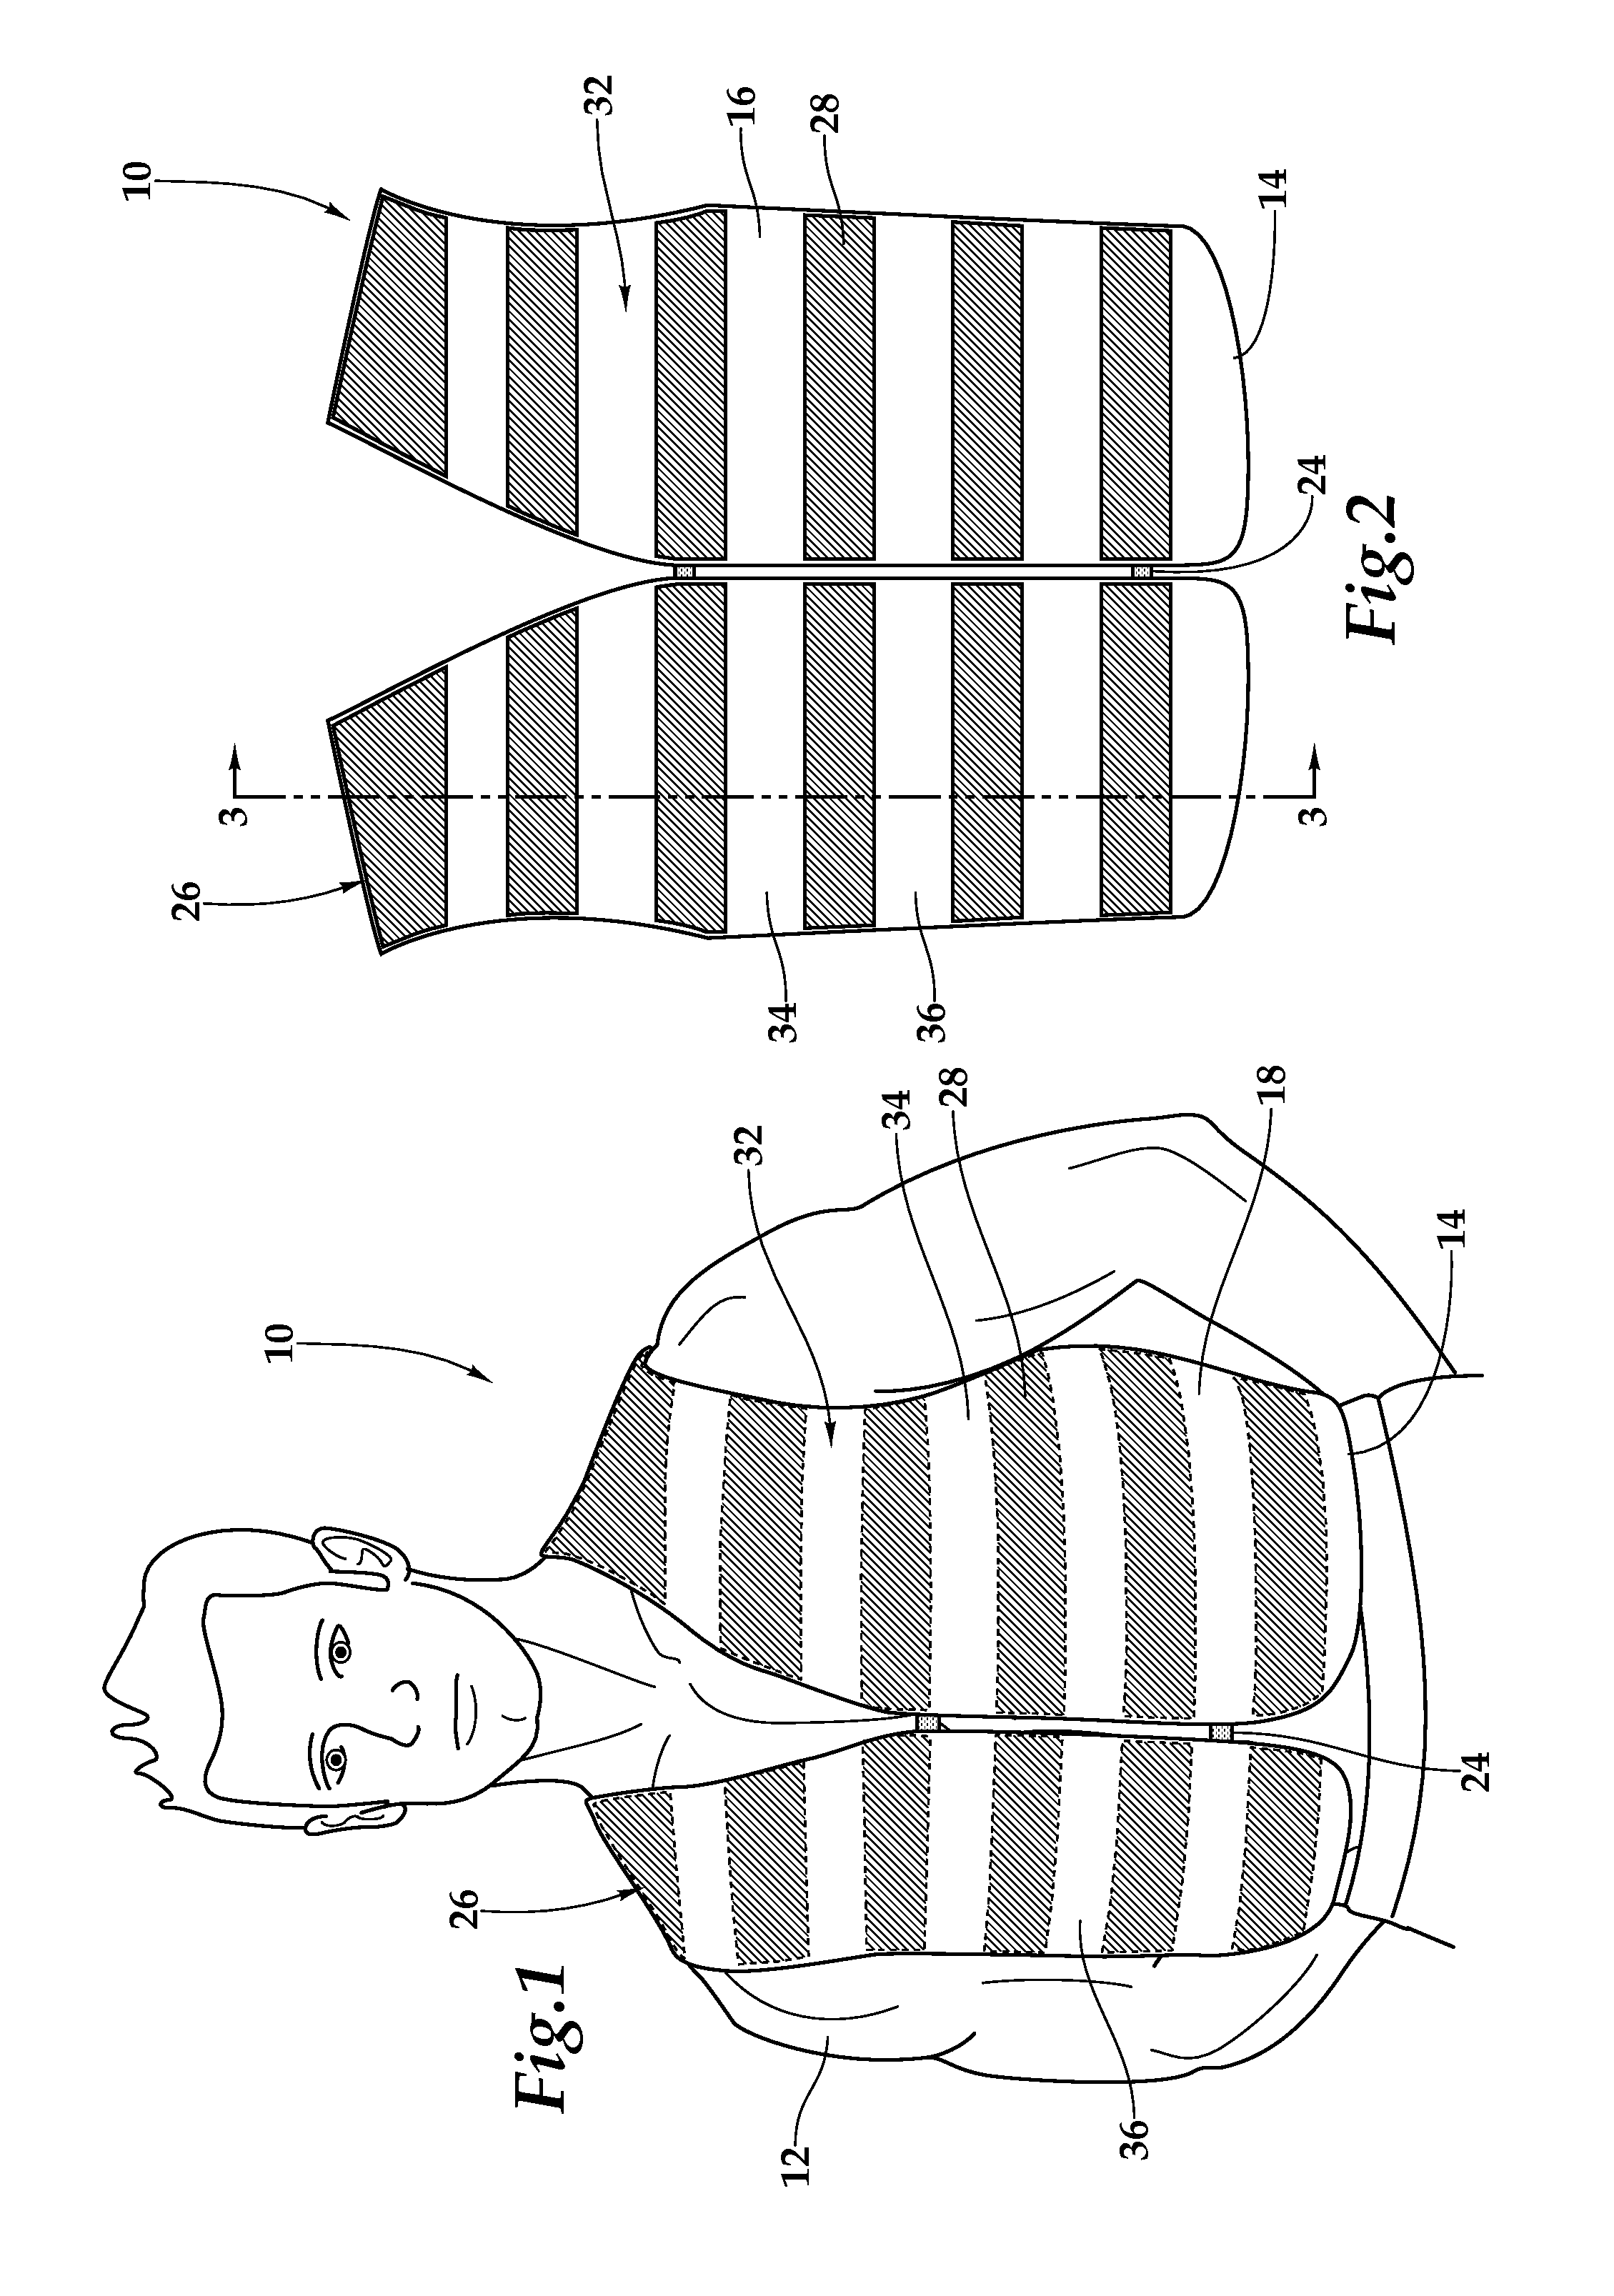 Cooling Article of Clothing and Method of Use for Same